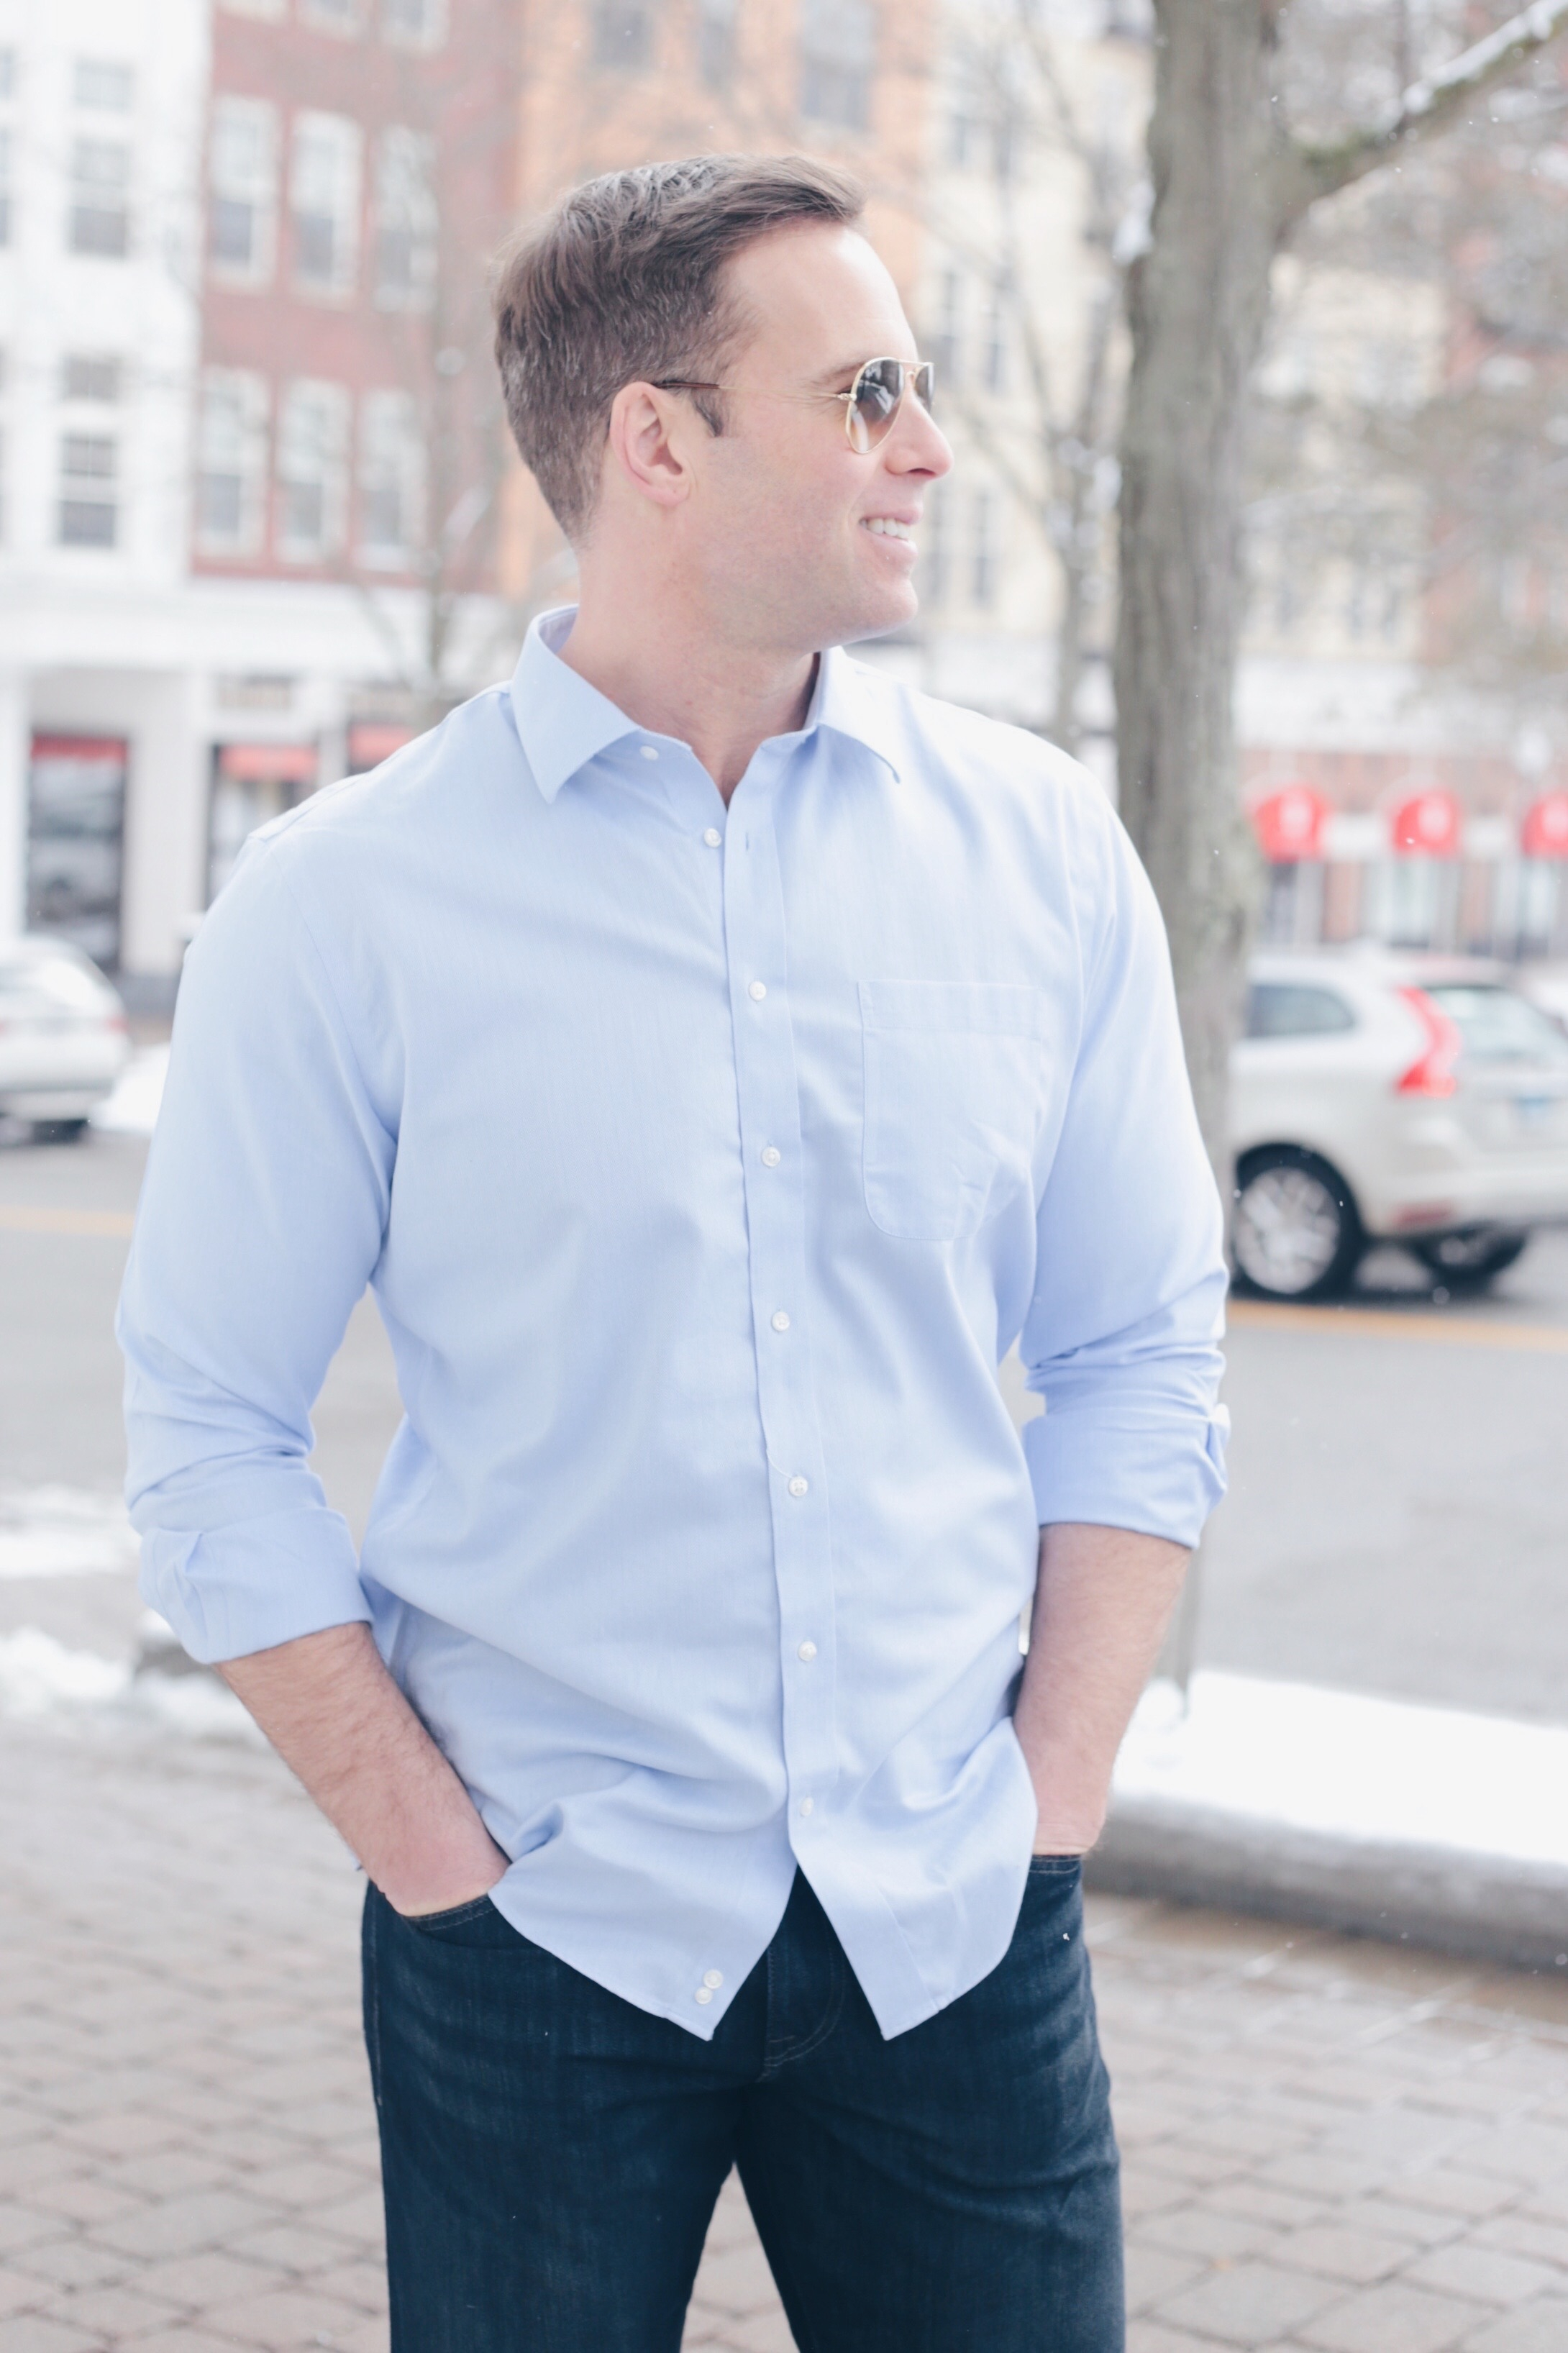  men's spring capsule wardrobe 2019 - blue button down shirt in tall sizes